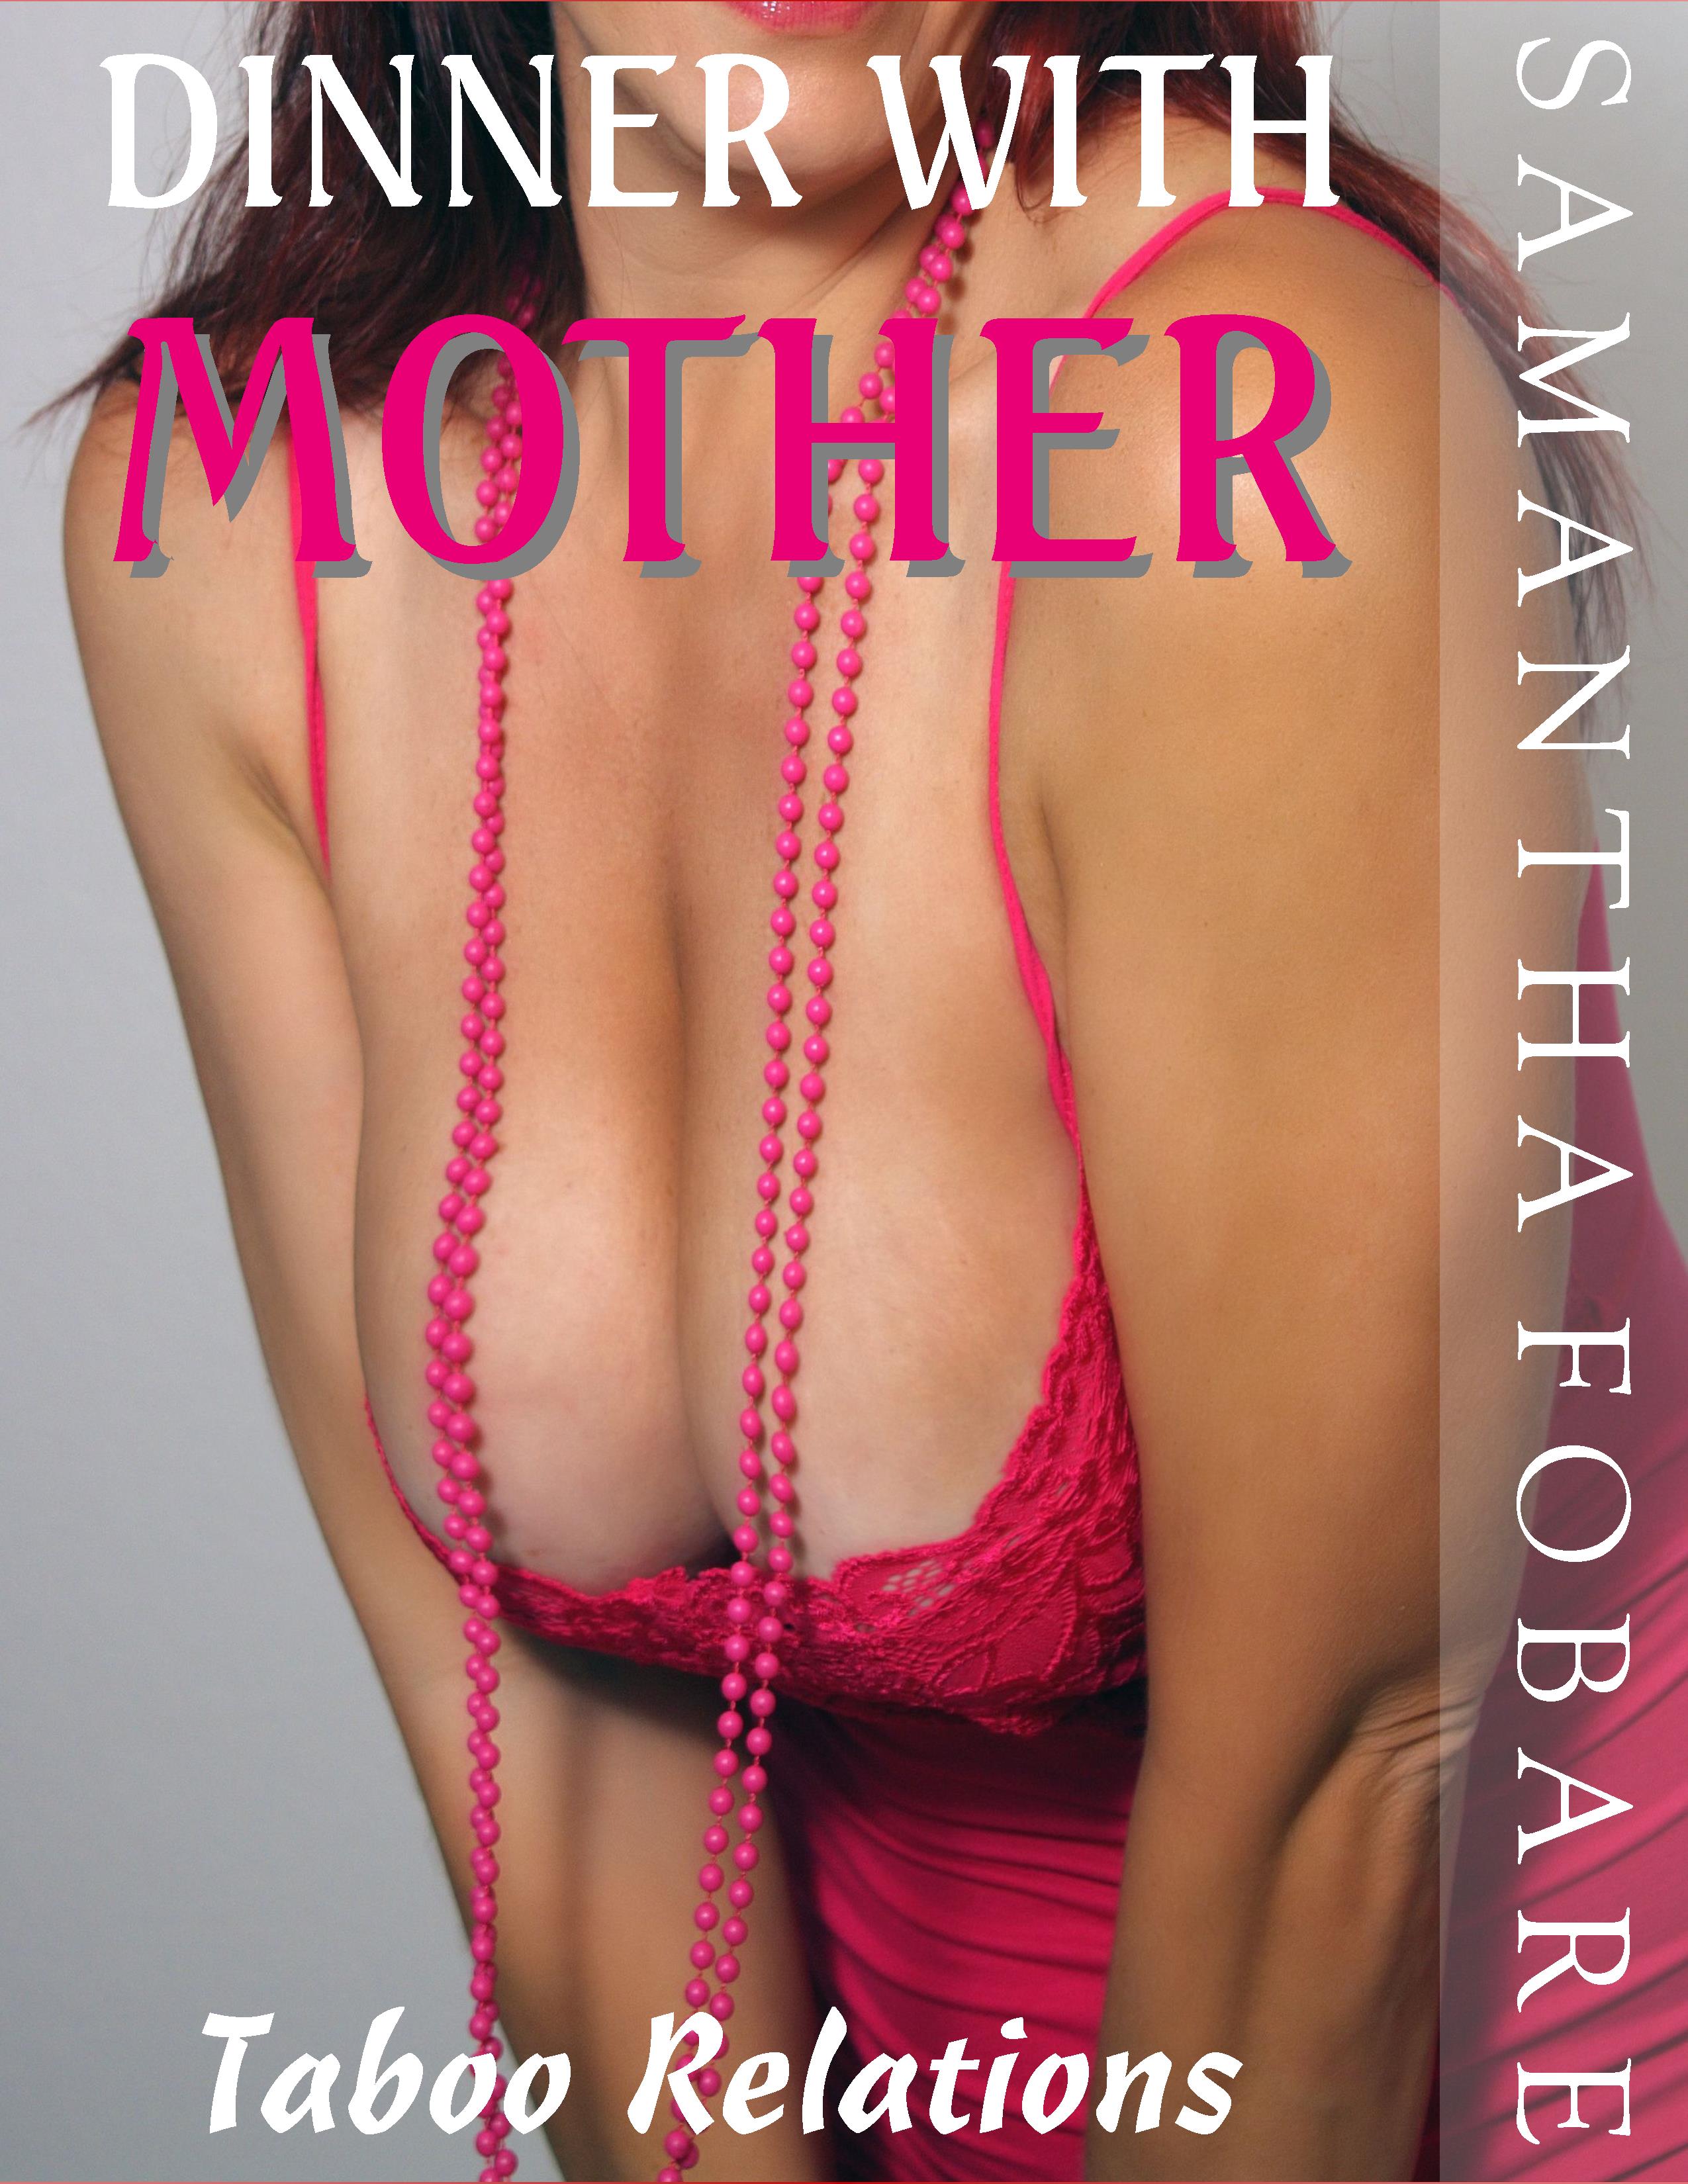 Dinner with Mother: Taboo Relations, an Ebook by Samantha Fobare